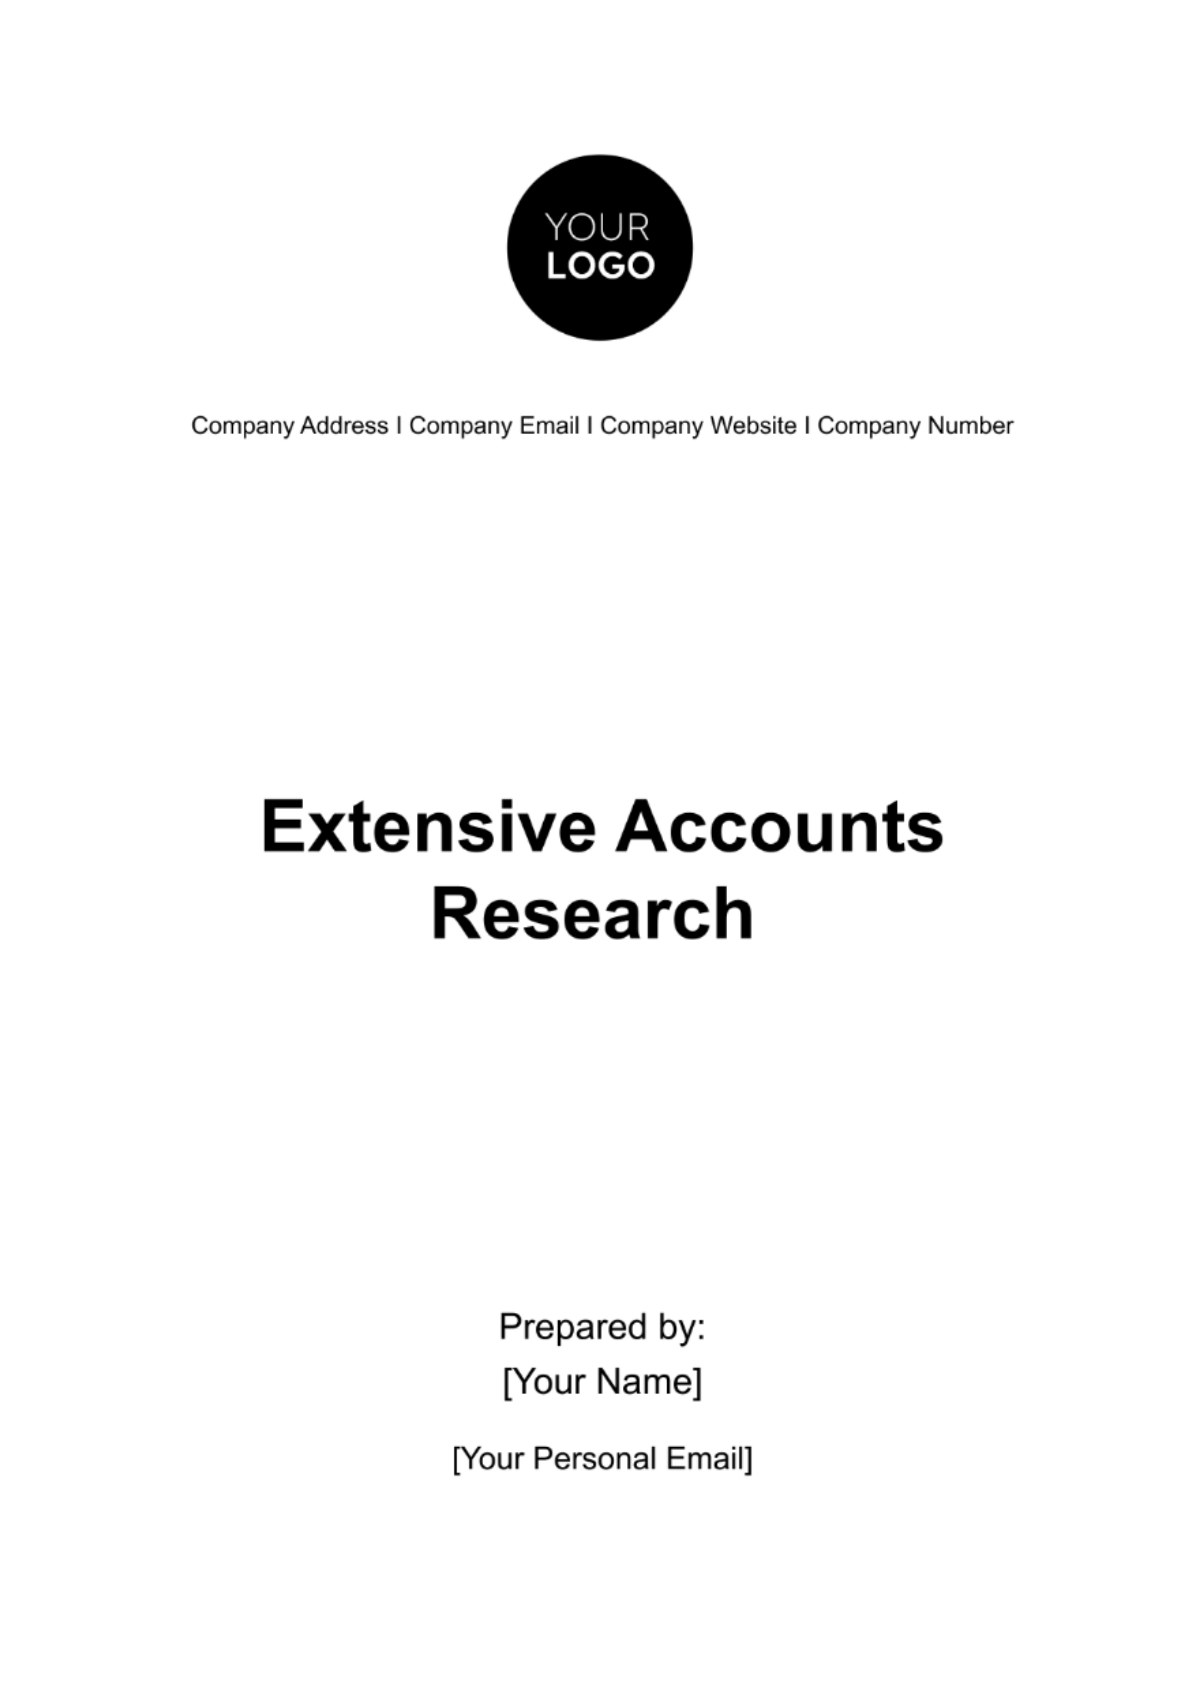 Free Extensive Accounts Research Template